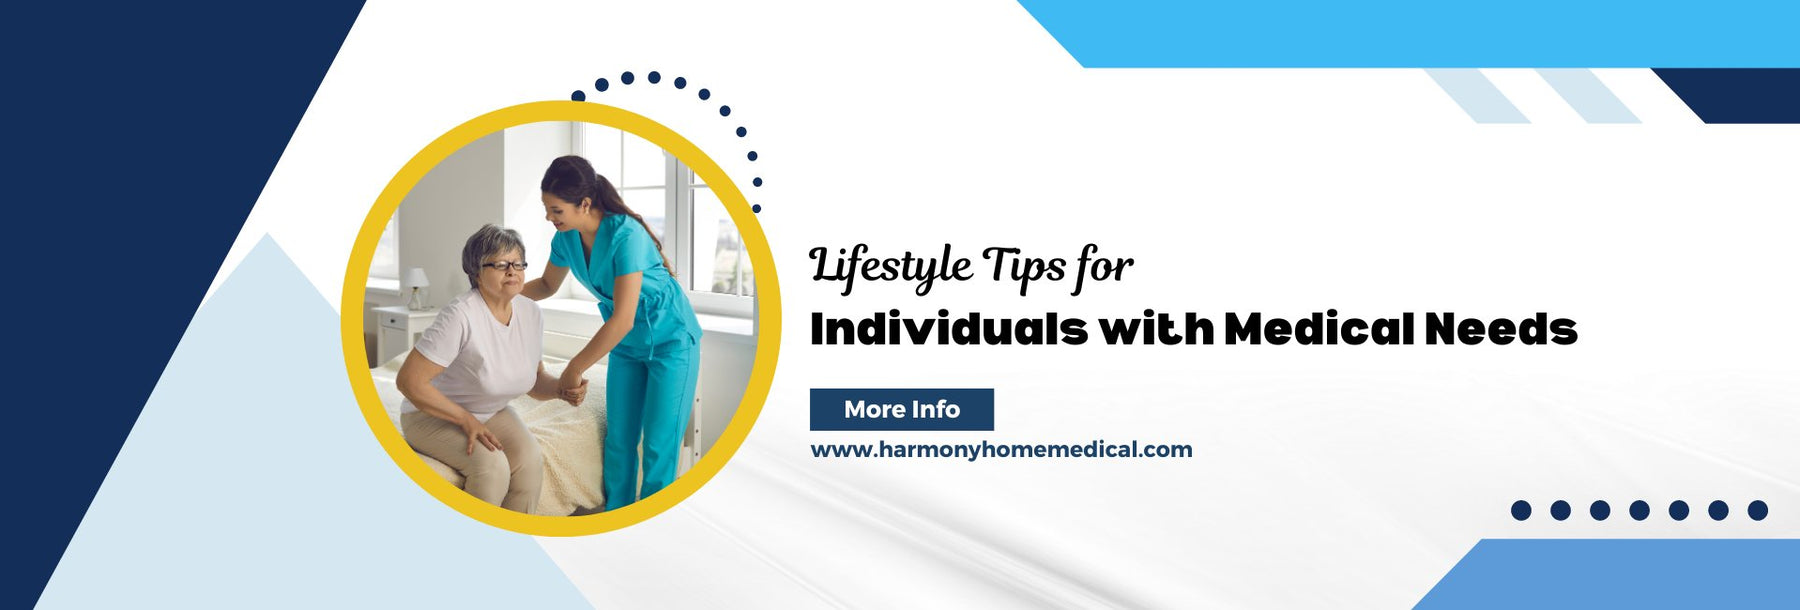 Lifestyle Tips for Individuals with Medical Needs - Harmony Home Medical Supply